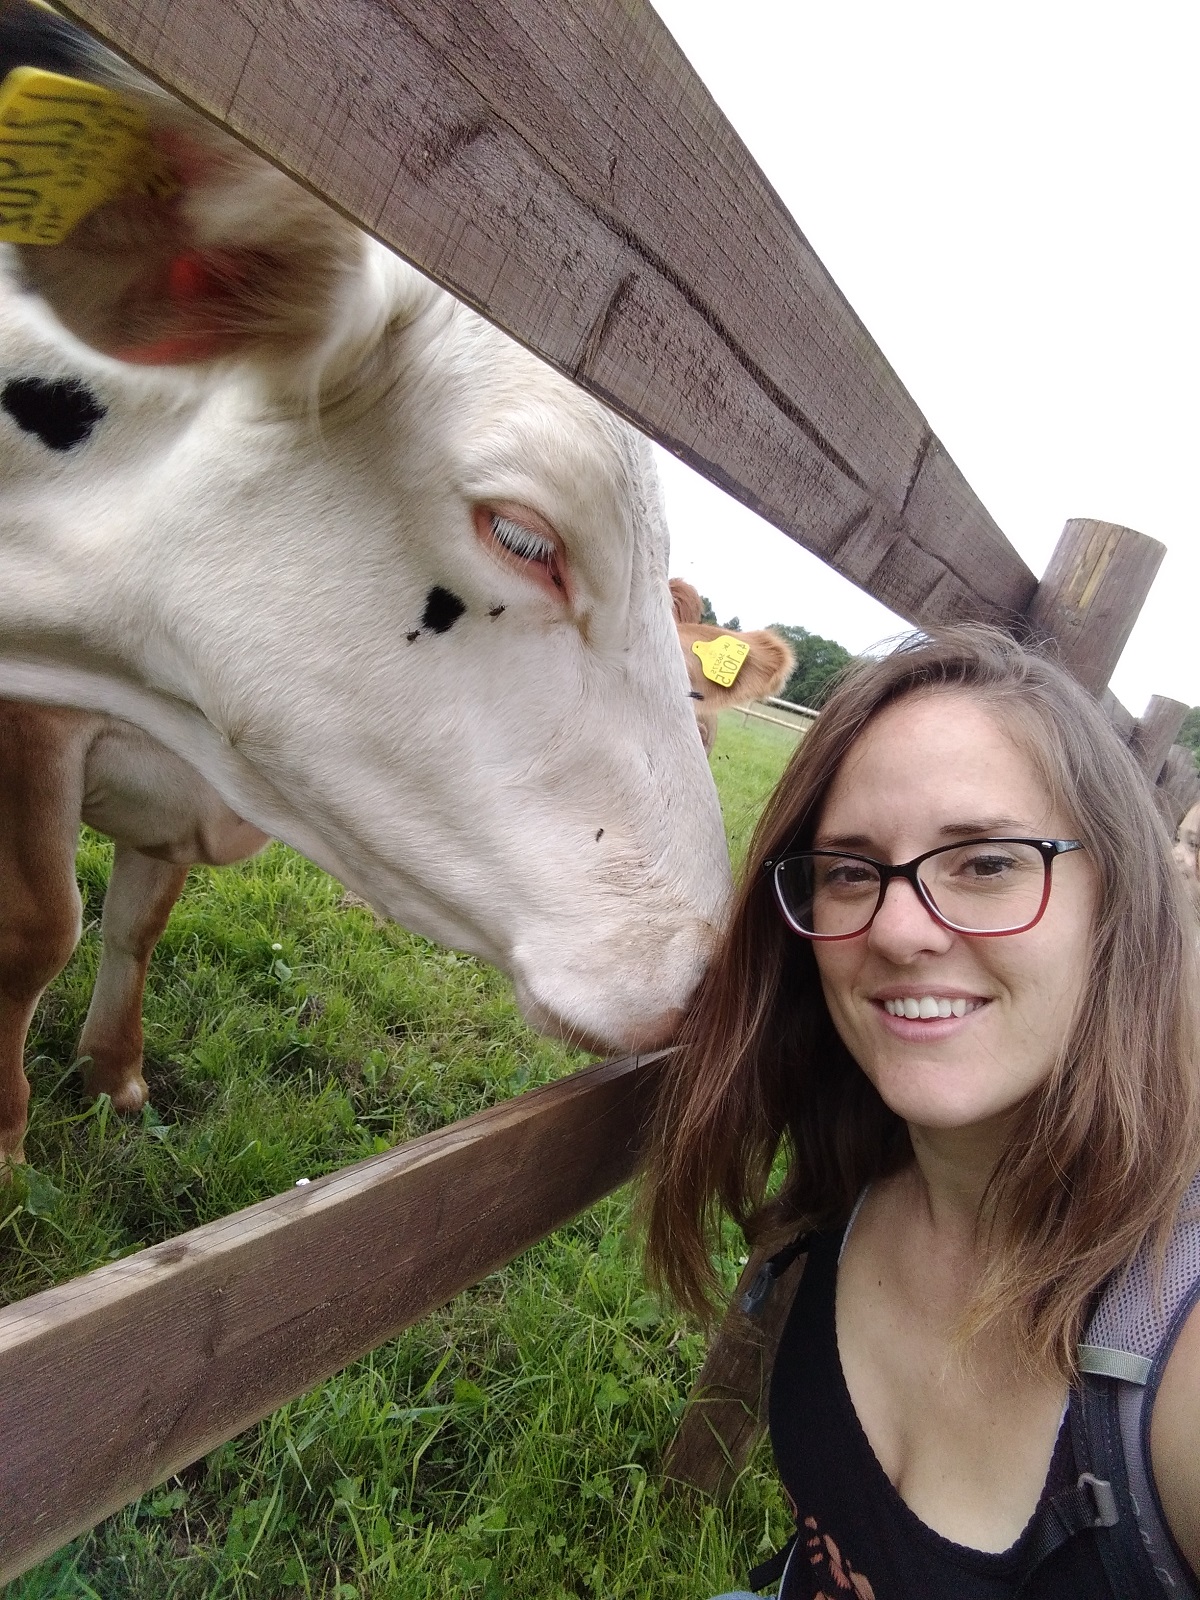 A young woman, Amy, in a field with a cow. Amy is one of the vegan mums we spoke to for this piece.